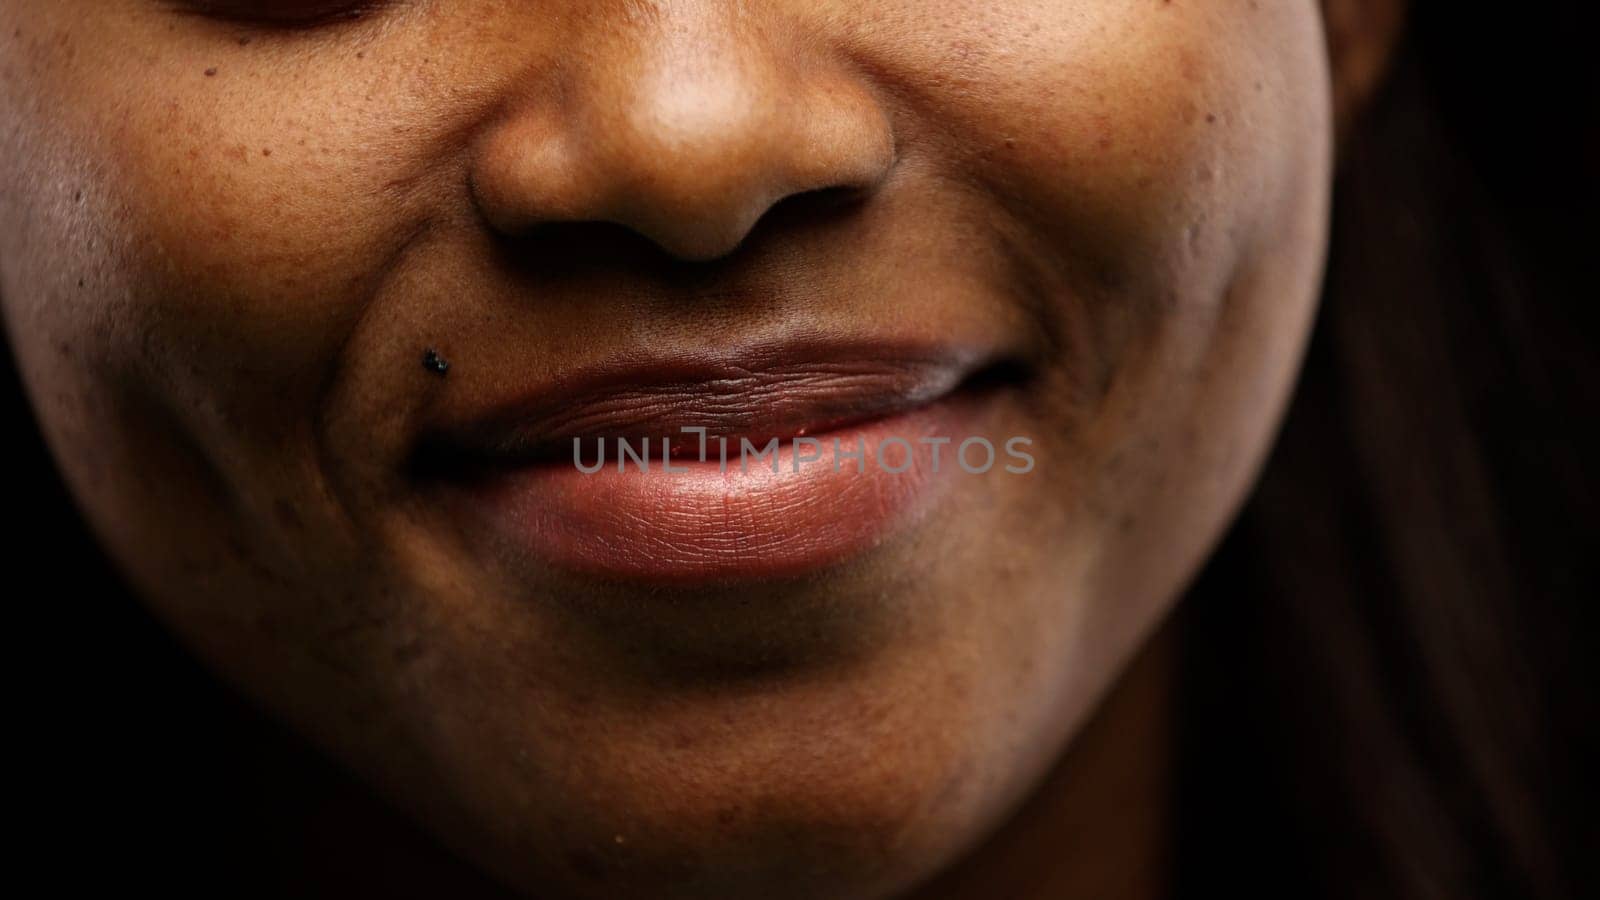 Woman's mouth, mouth closed, close-up by Prosto